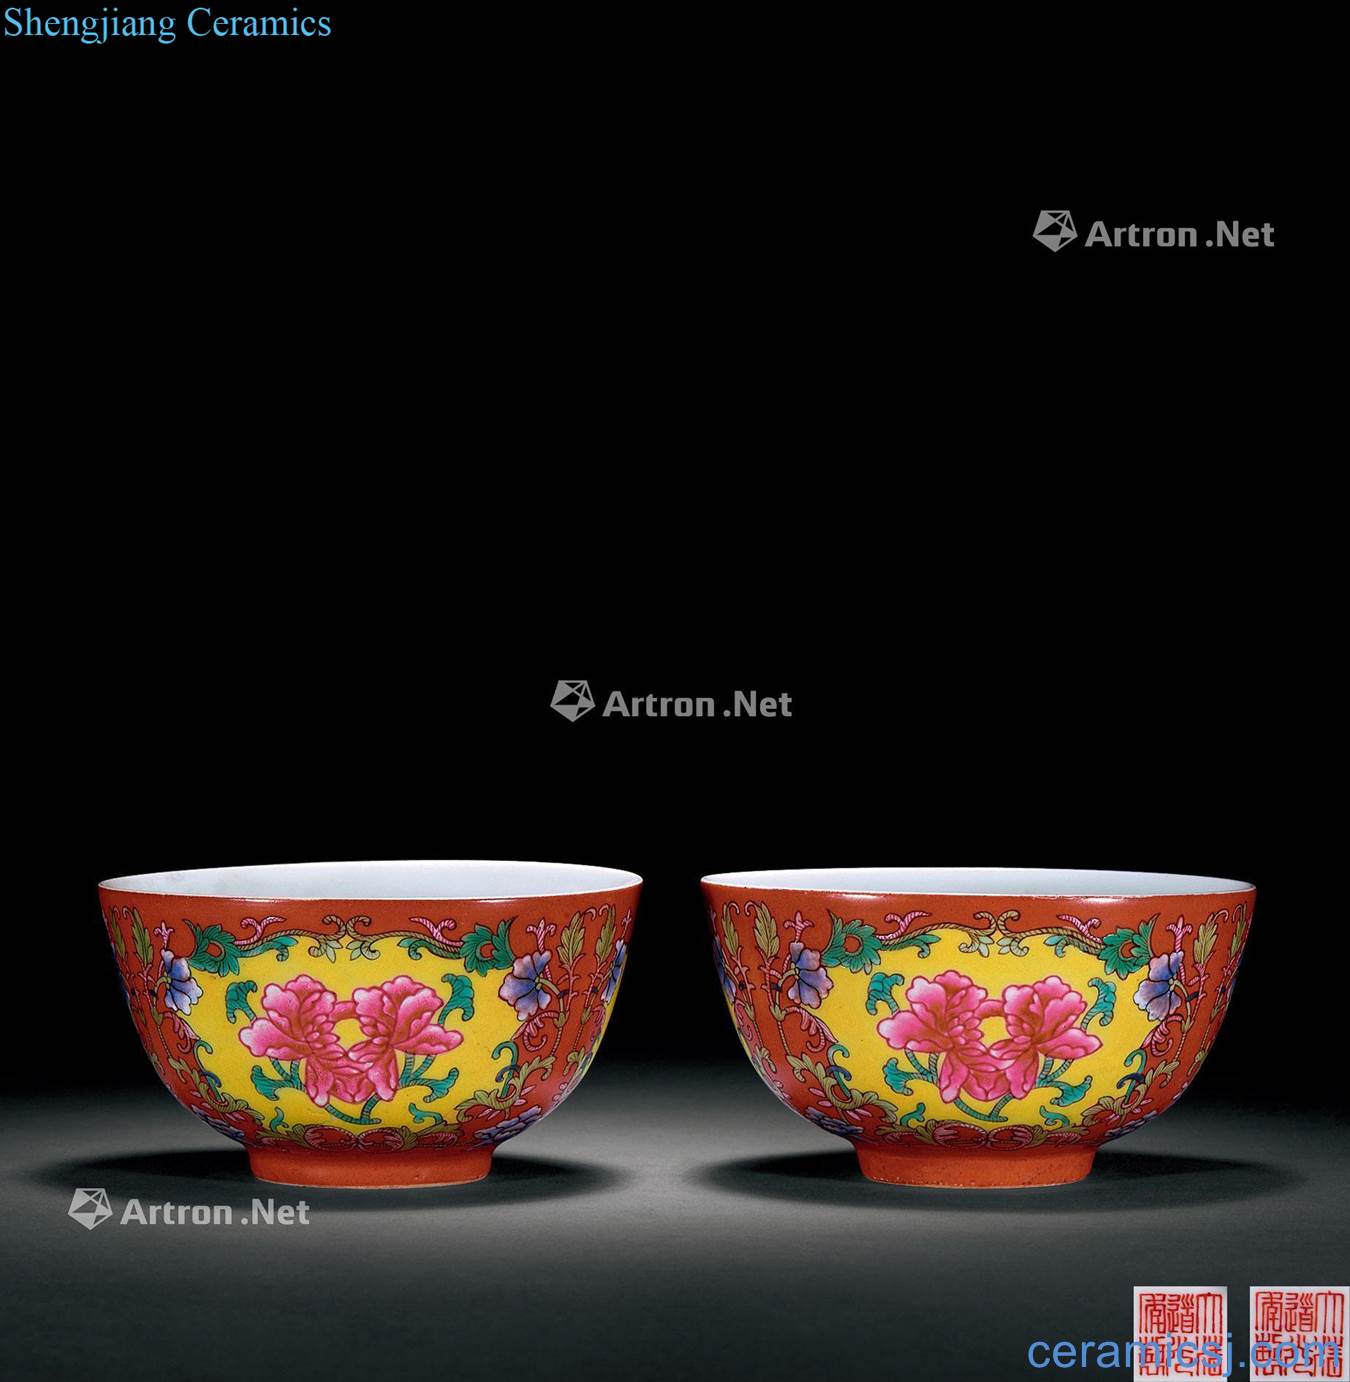 Qing daoguang Coral red pastel flowers bowl (a)